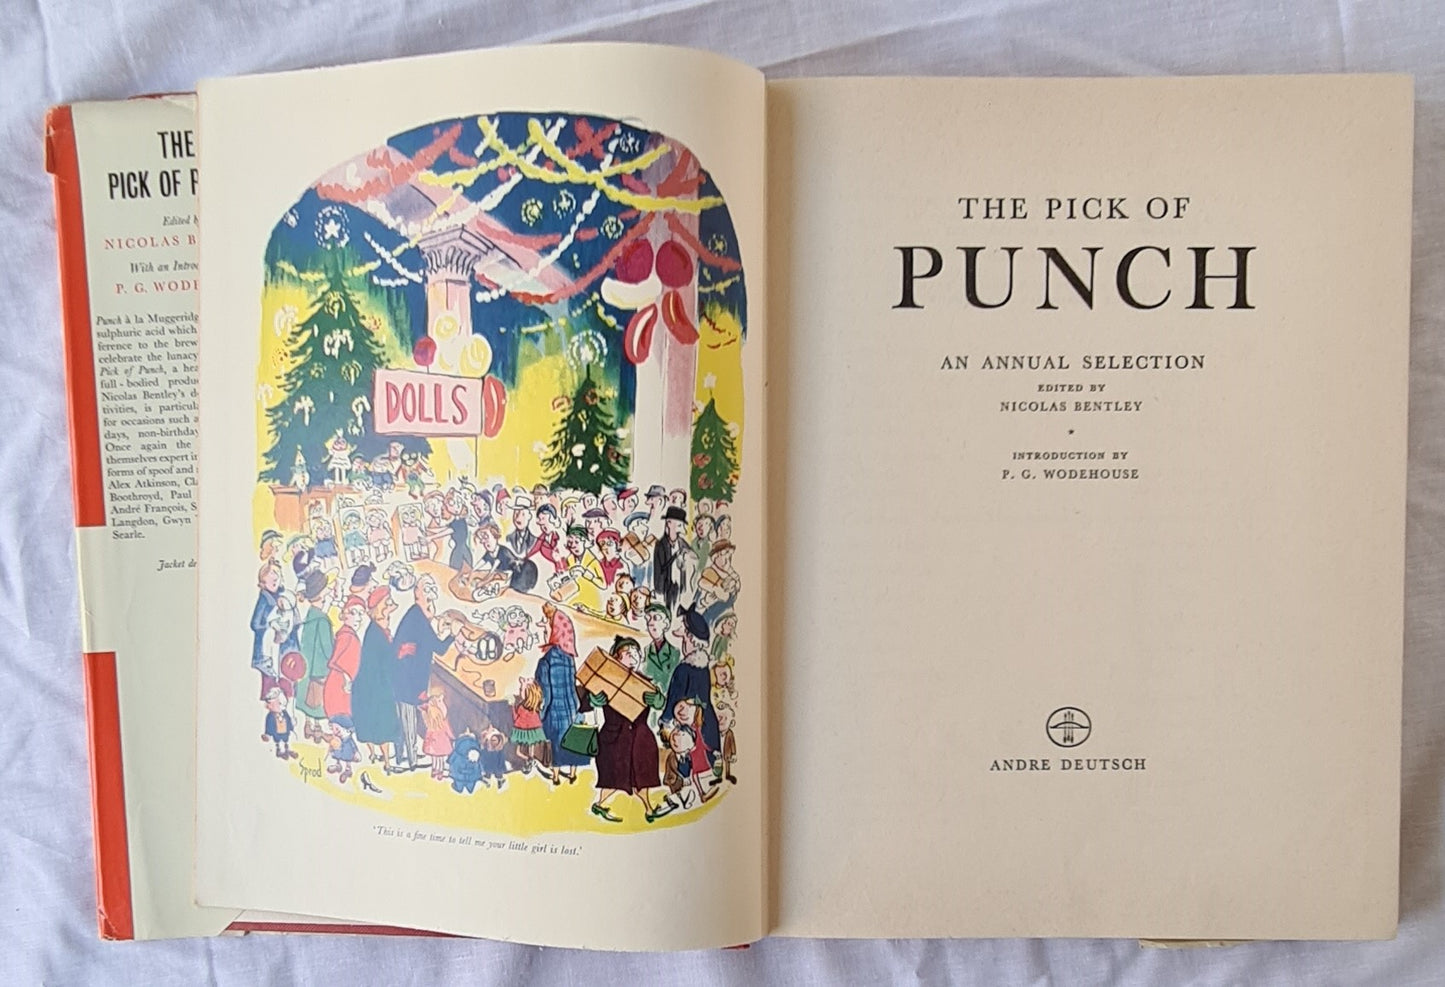 The Pick of Punch by Nicolas Bentley